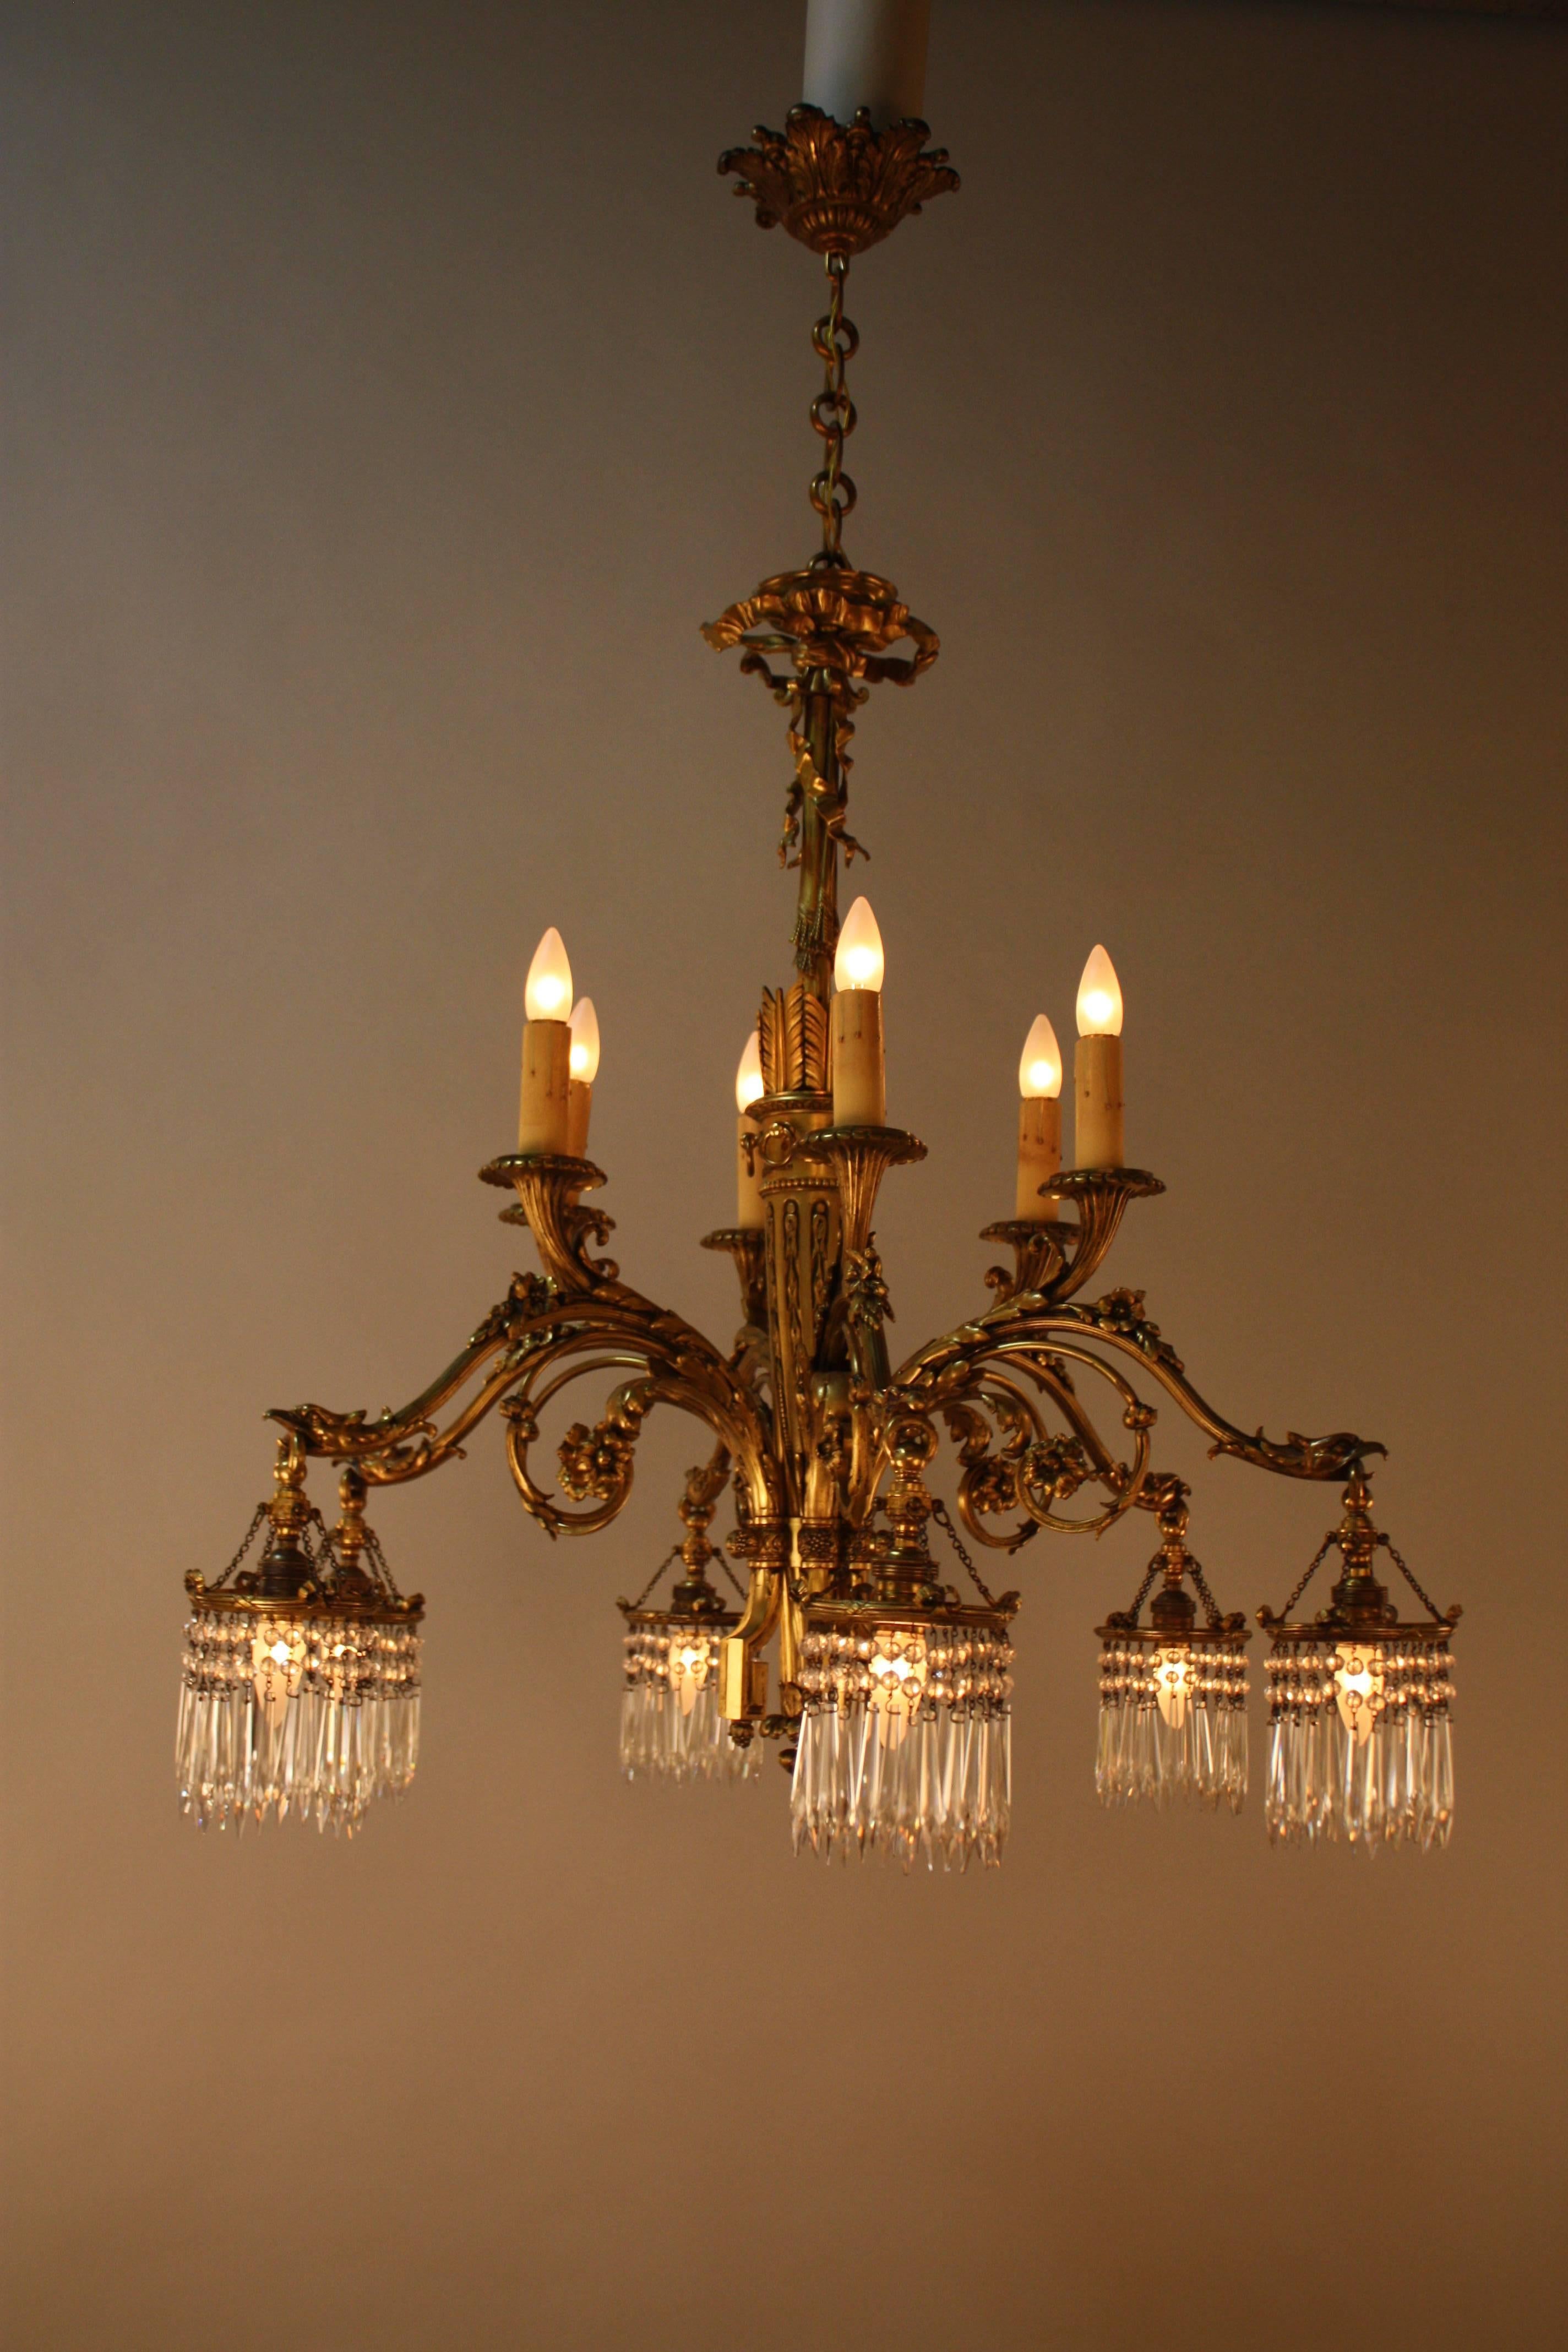 A superb Empire style bronze chandelier. French 1930s elegant design high quality twelve light chandelier with six candle style light and six down lighting with crystal surrounding the light bulbs.